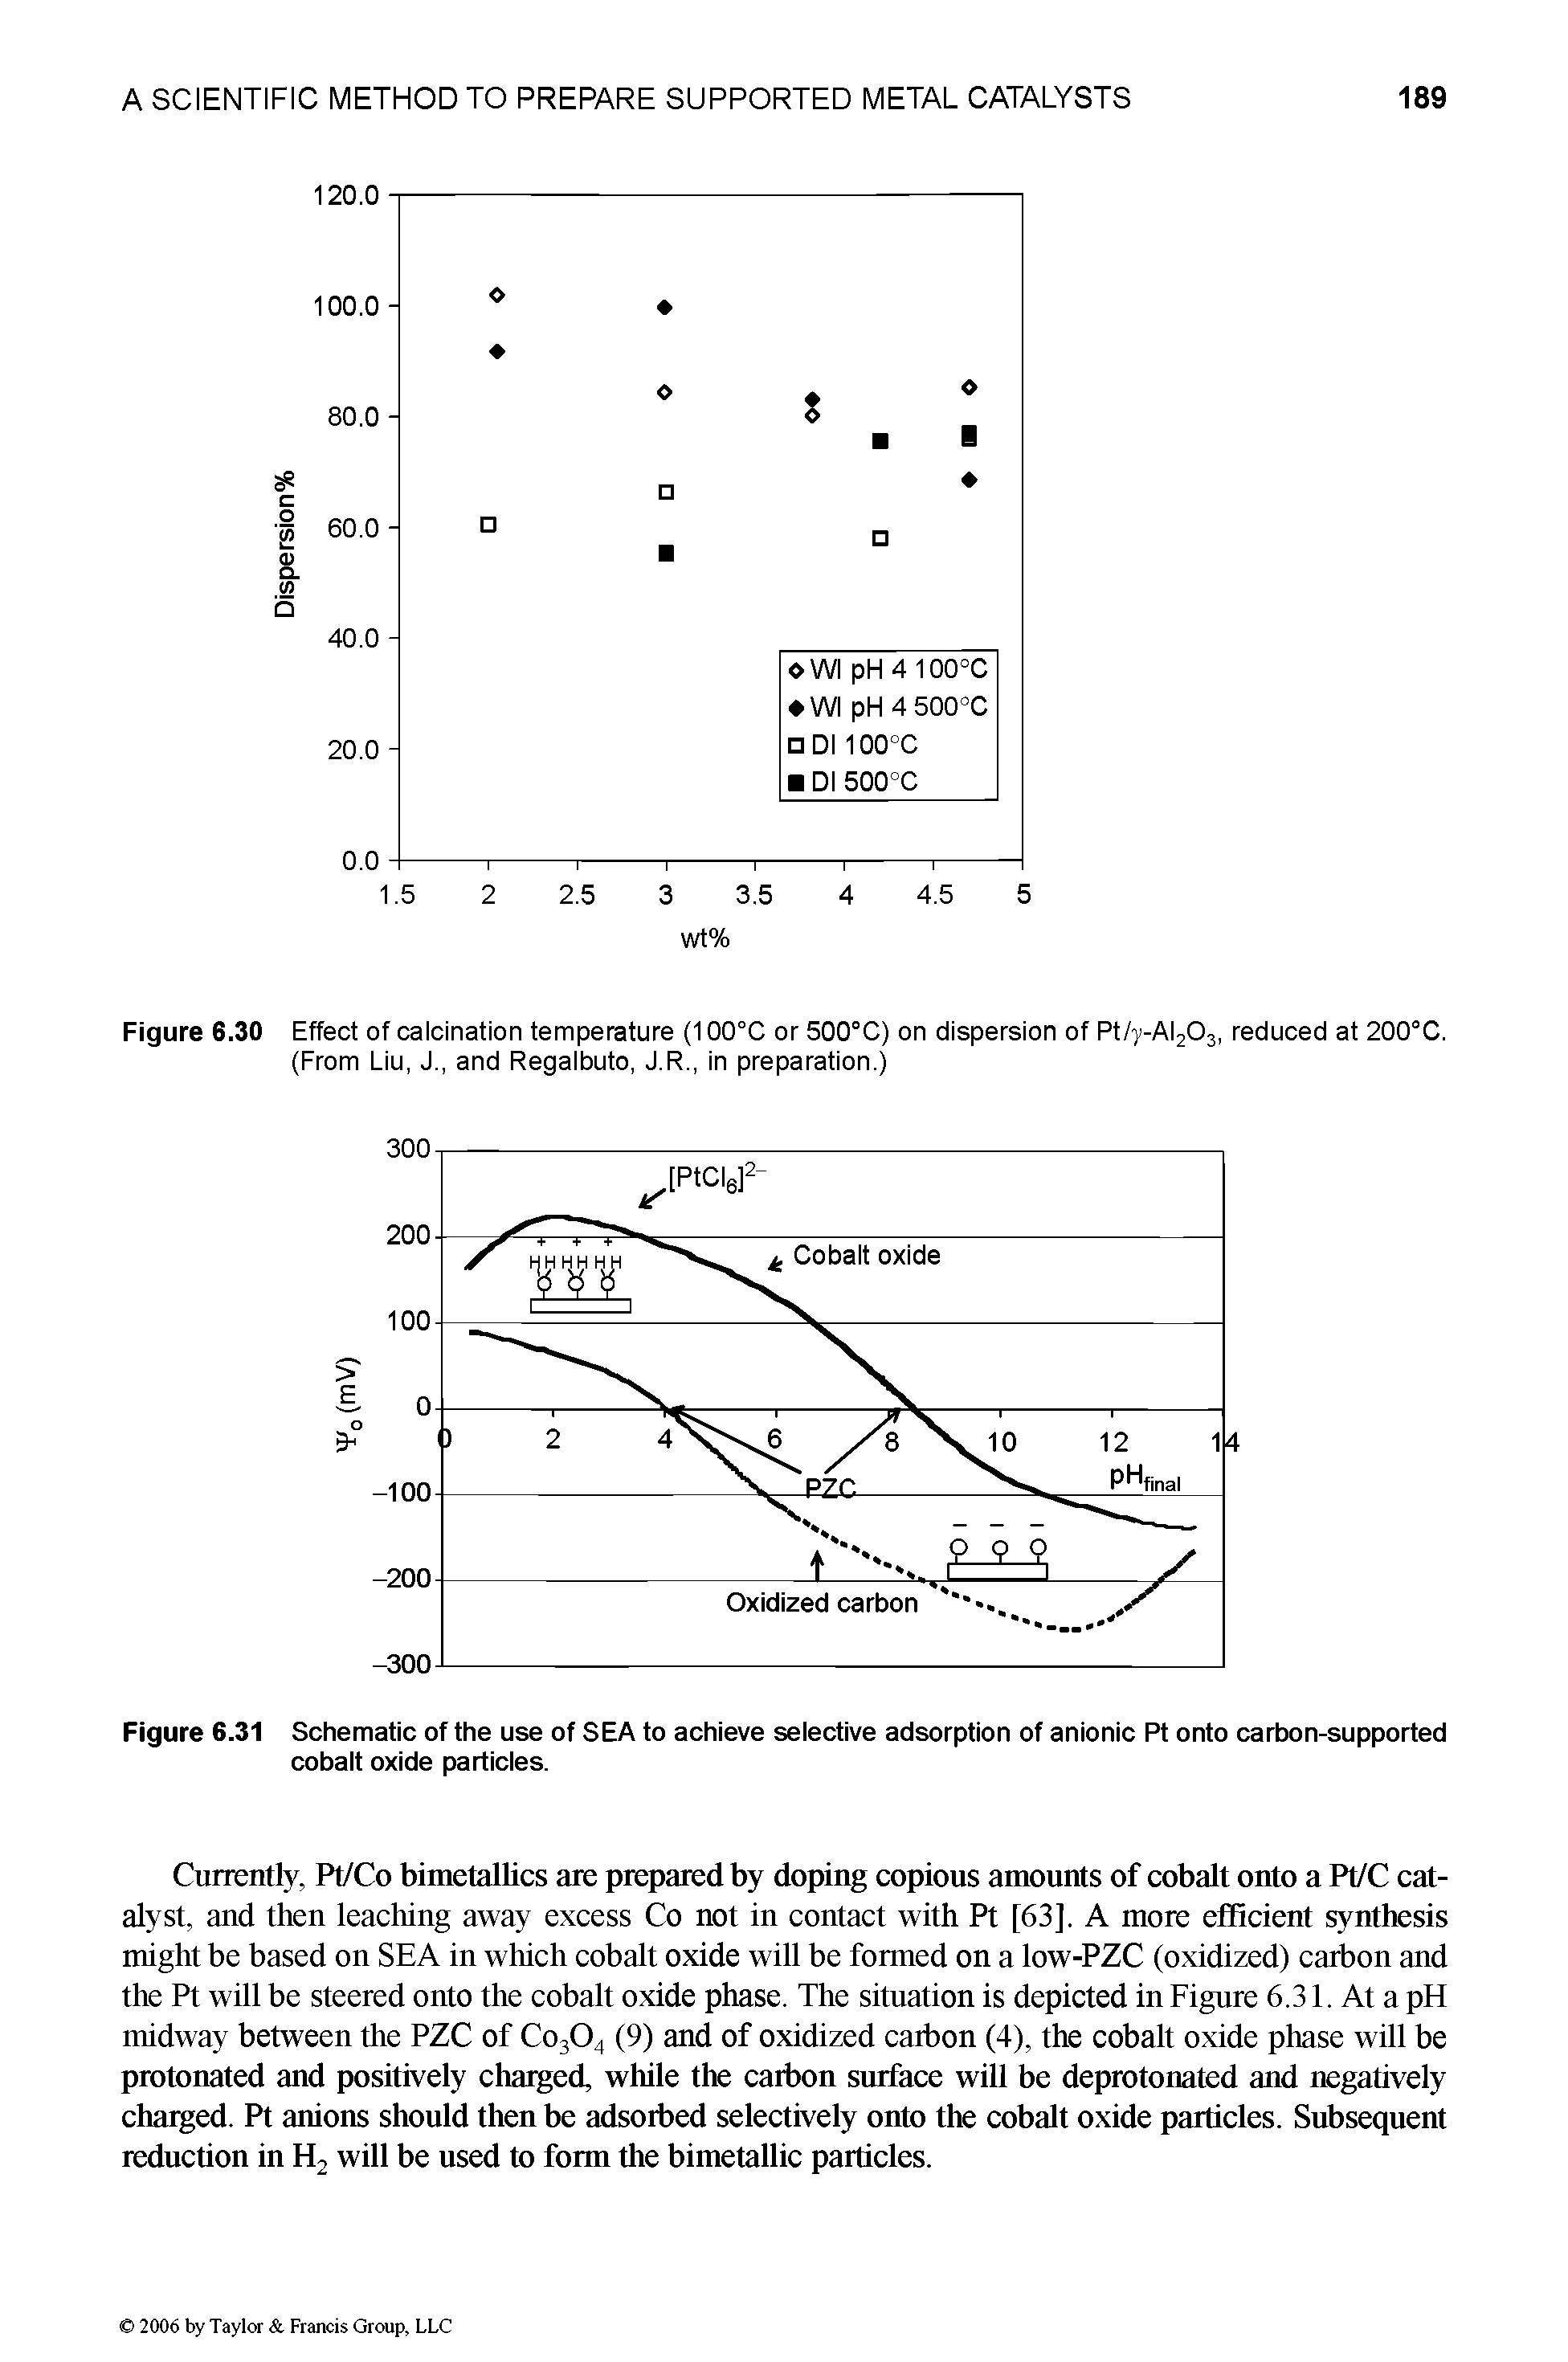 Figure 6.30 Effect of calcination temperature (100°C or 500°C) on dispersion of Pt/y-AI203, reduced at 200°C. (From Liu, J., and Regalbuto, J.R., in preparation.)...